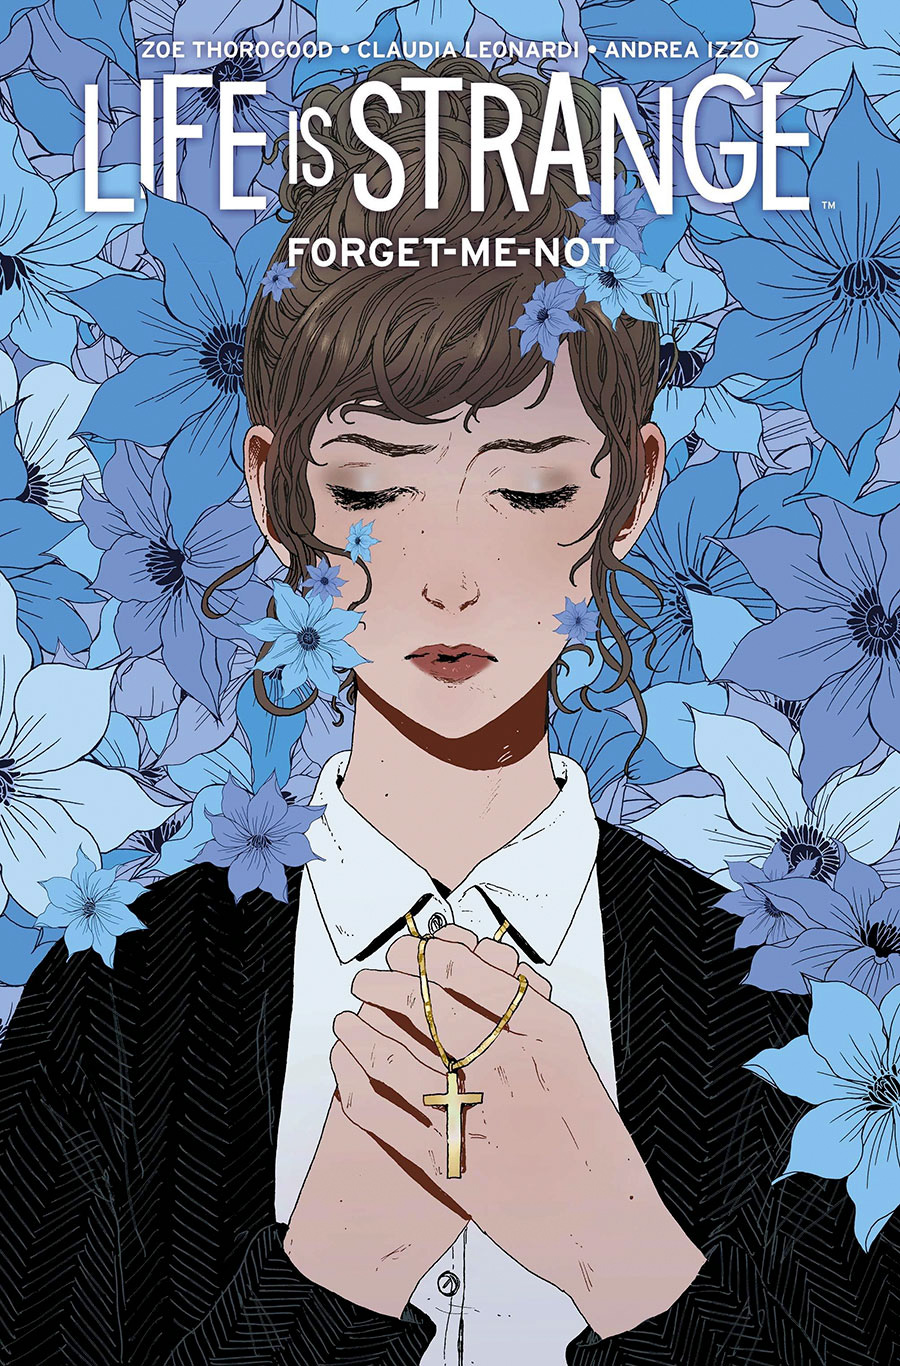 Life Is Strange Forget-Me-Not #2 Cover B Variant Zoe Thorogood Cover